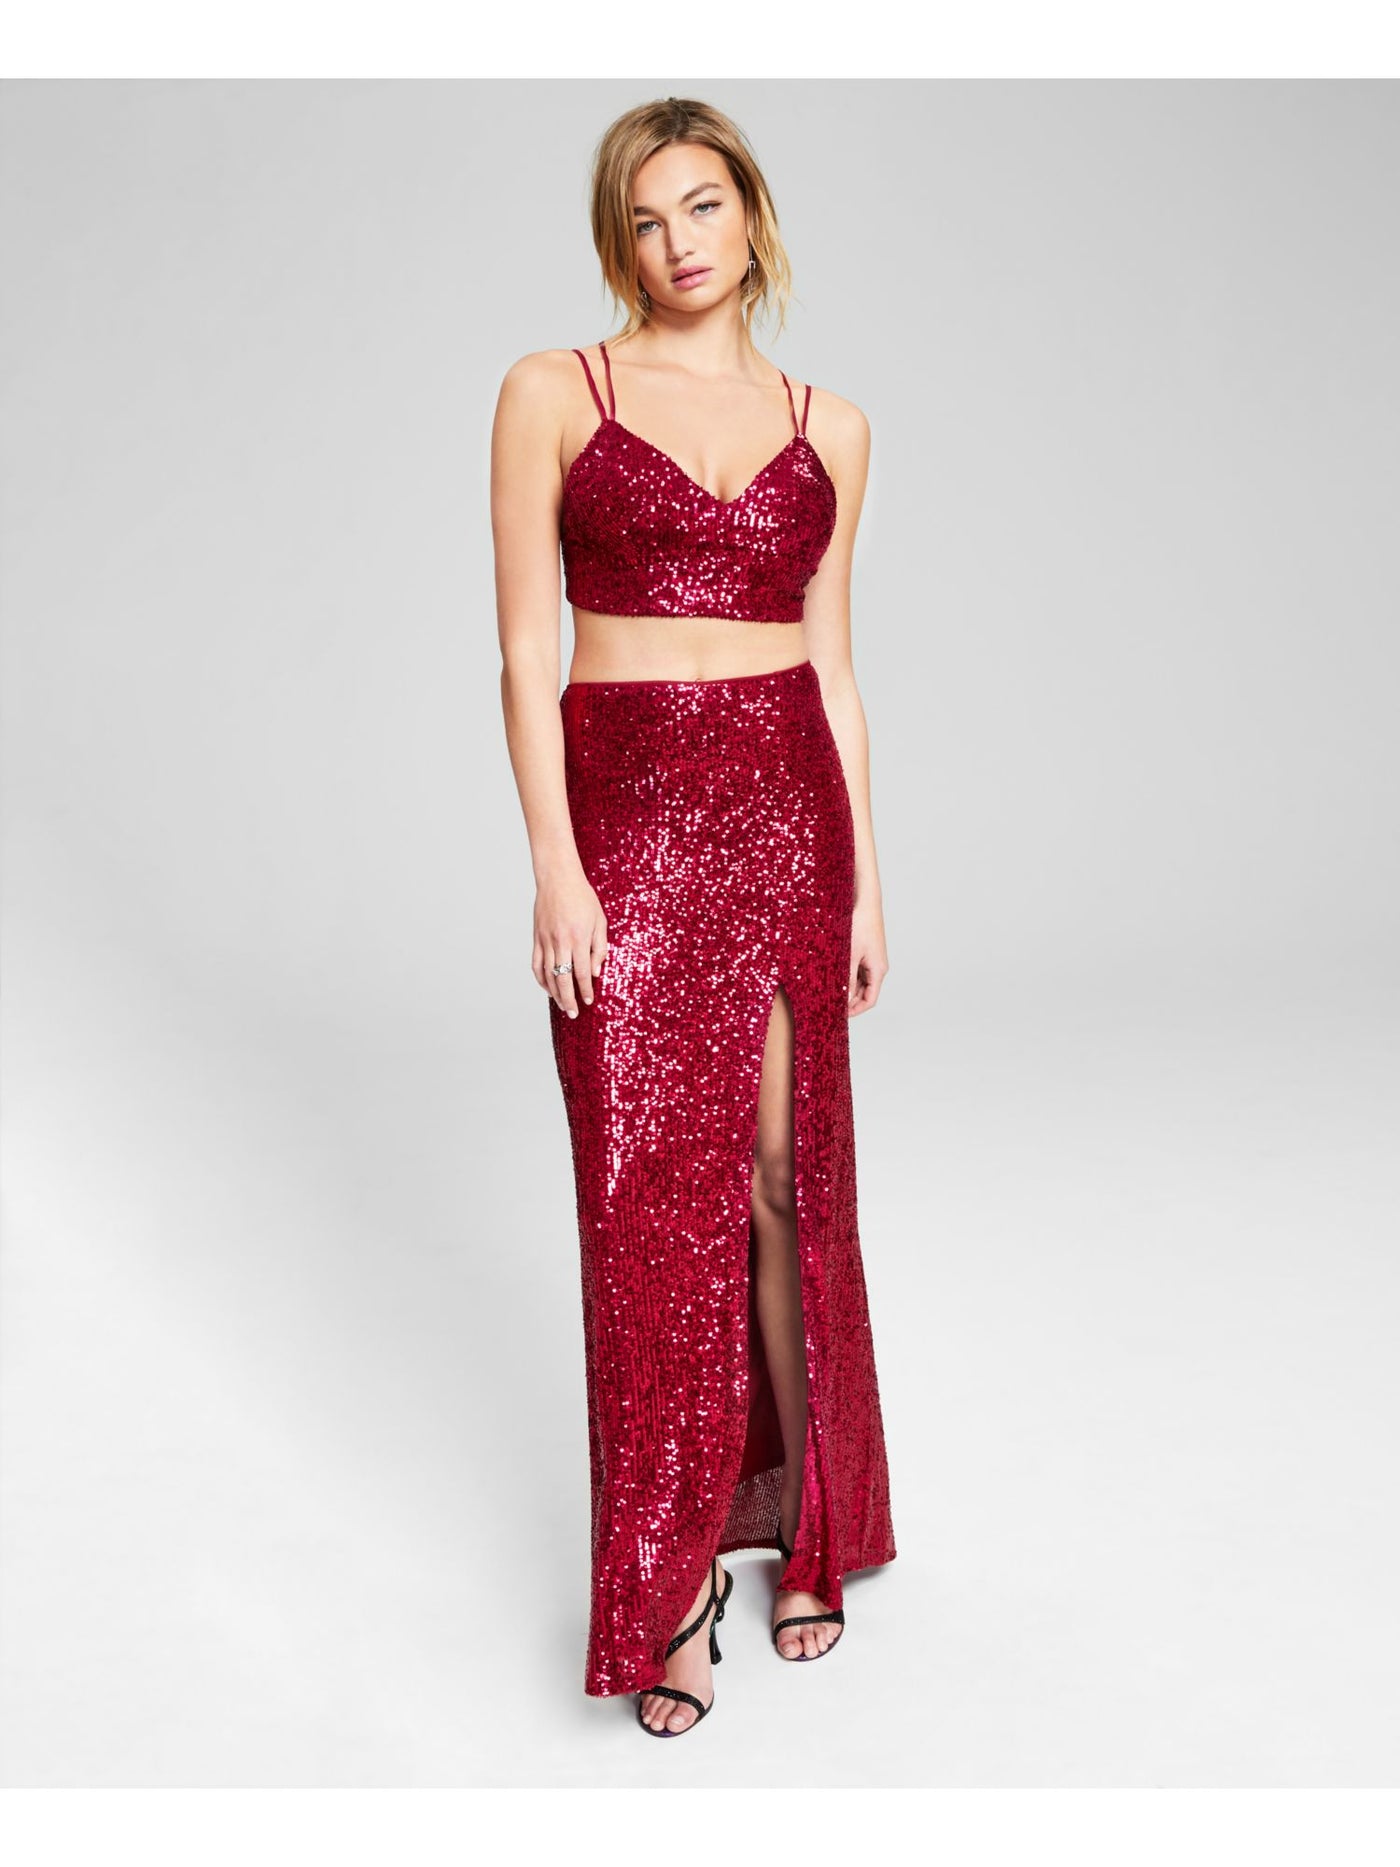 JUMP APPAREL Womens Maroon Sequined Slitted Lined Sleeveless V Neck Full-Length Prom Gown Dress Juniors 13\14